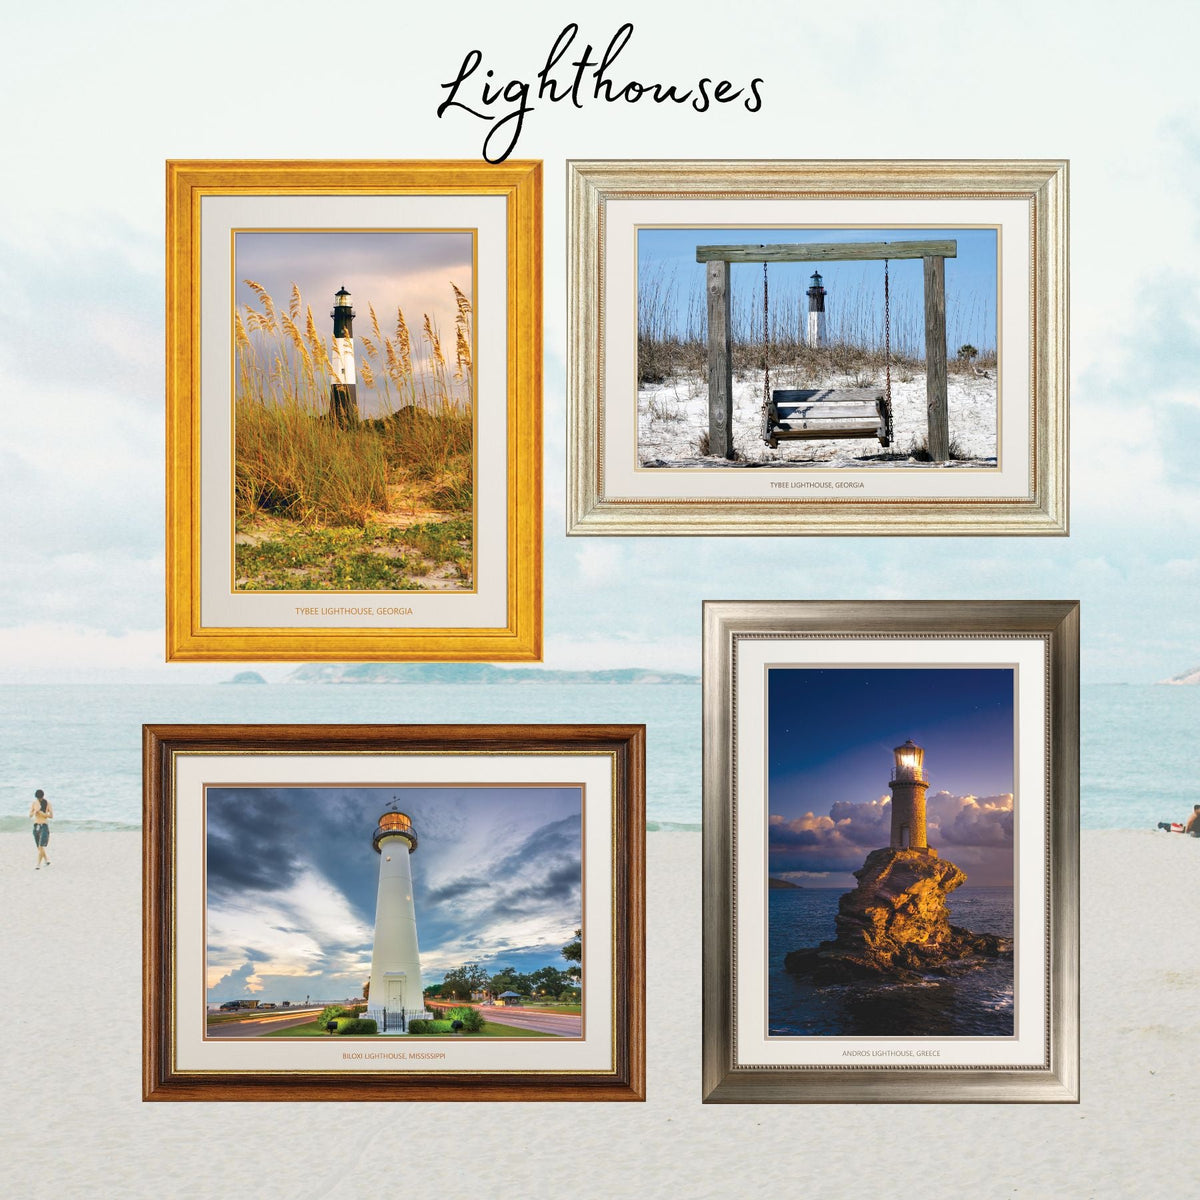 Movable Lighthouse posters